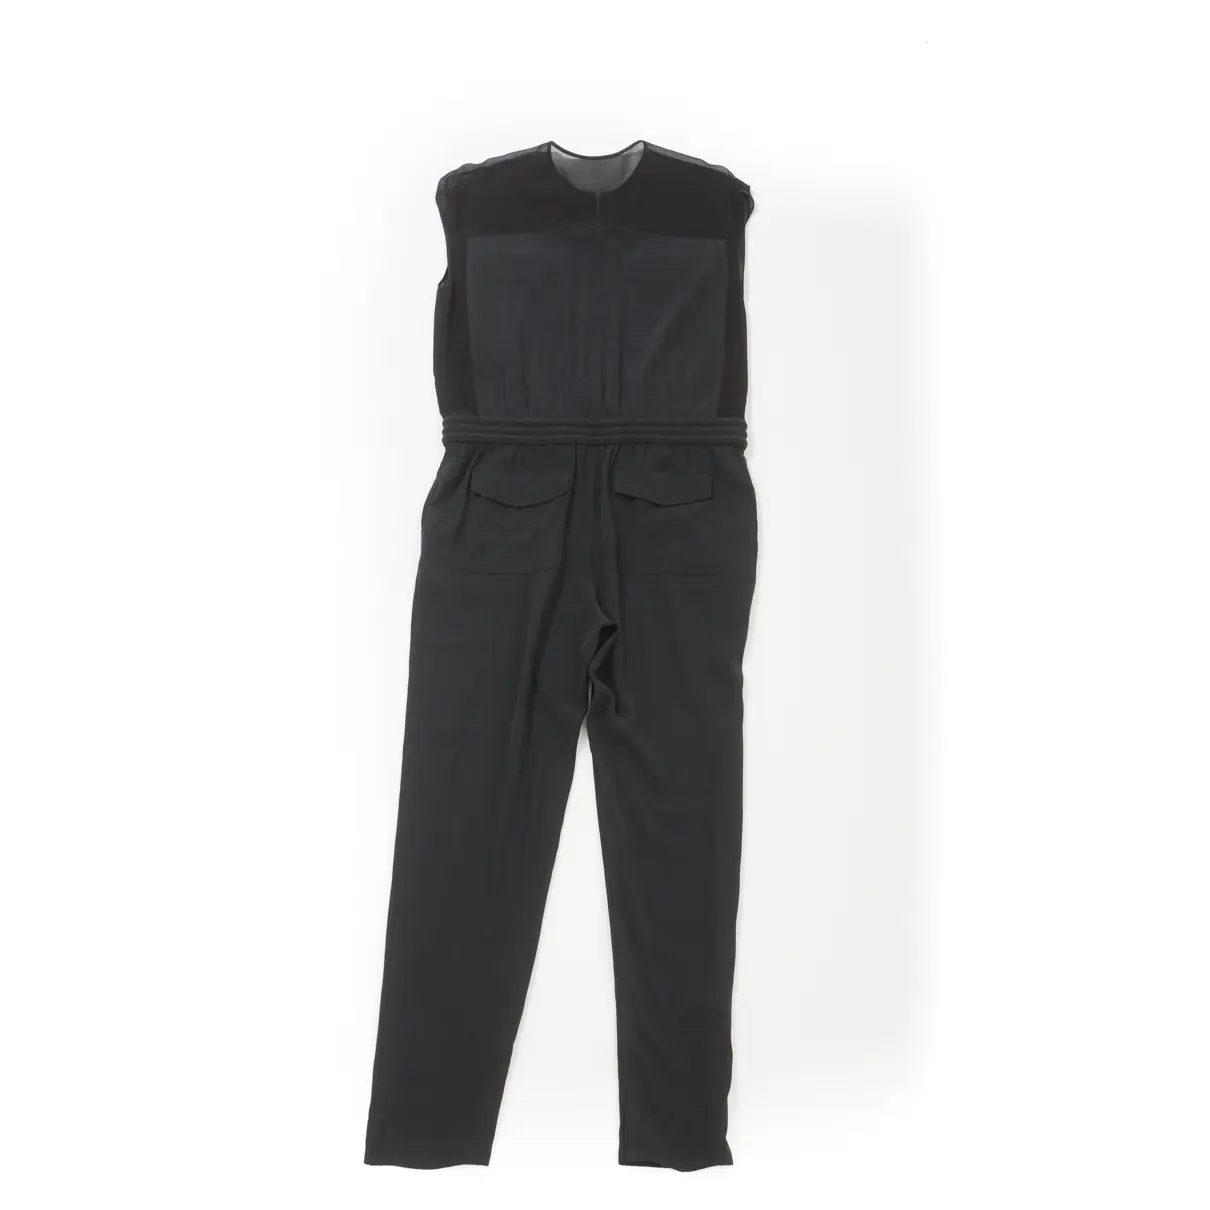 T by Alexander Wang Jumpsuit for sale